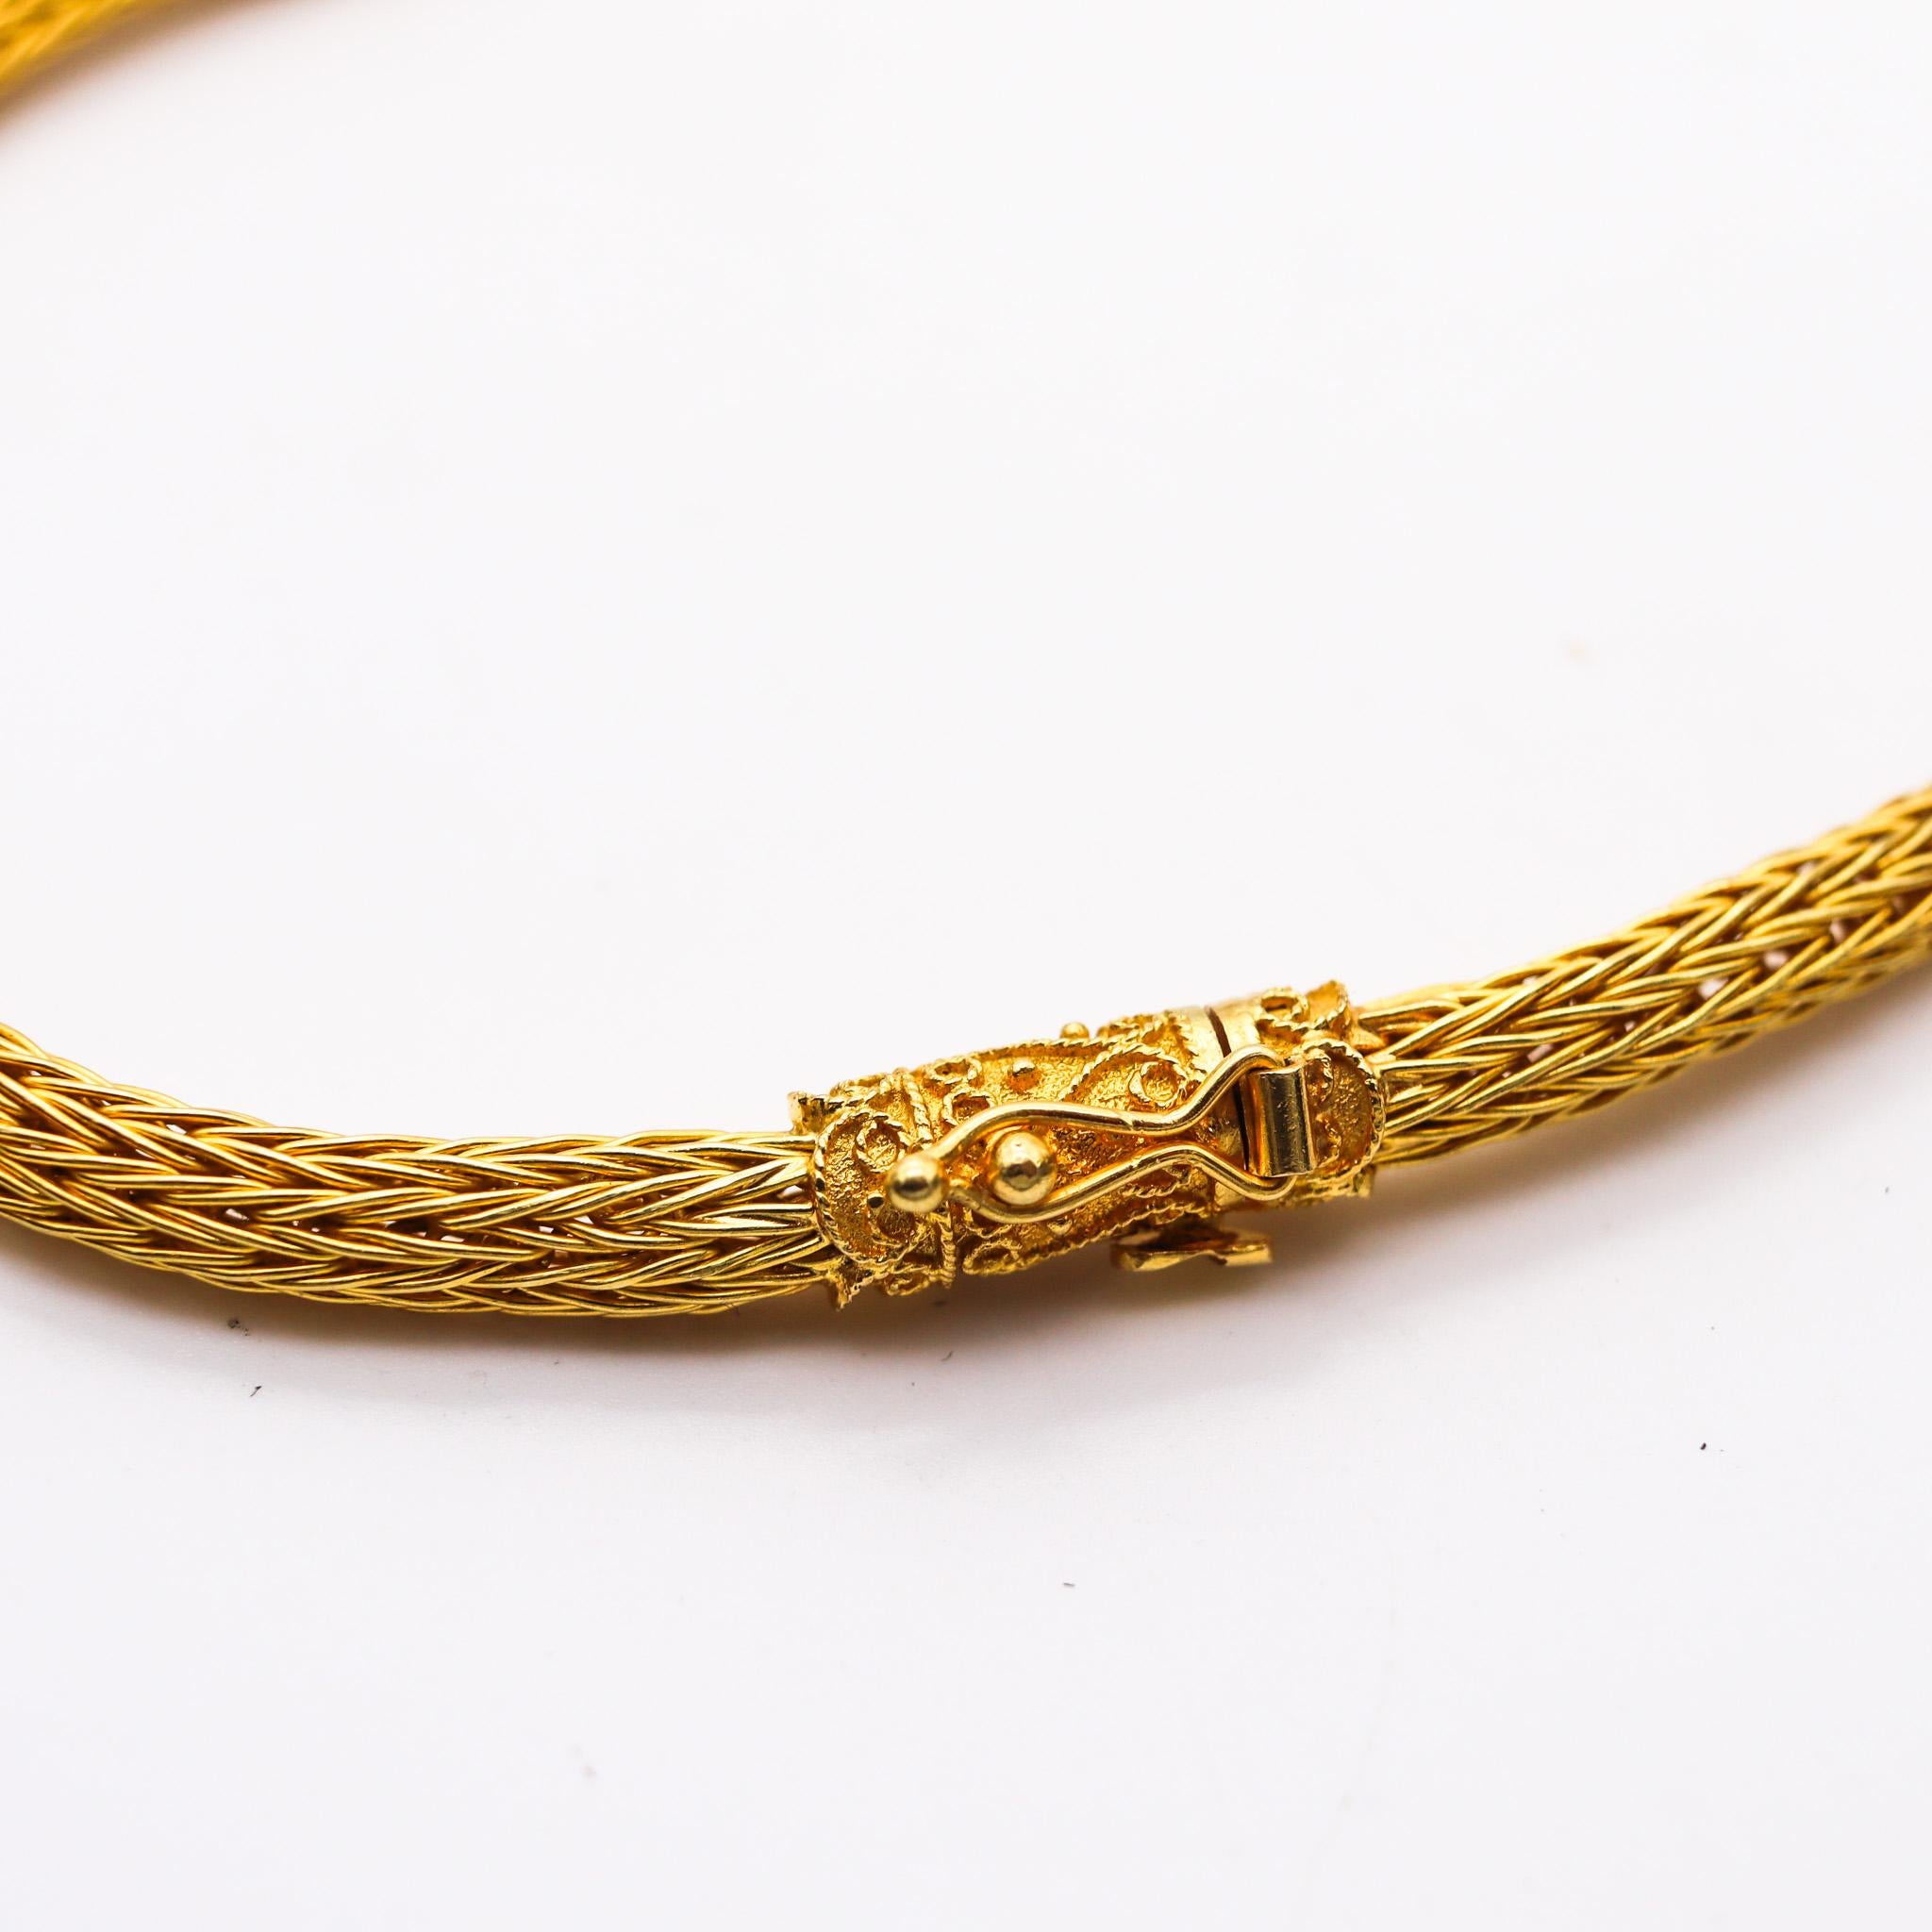 Zolotas Greek Revival Hercules Sautoir Mesh Necklace In solid 18Kt Yellow Gold For Sale 2